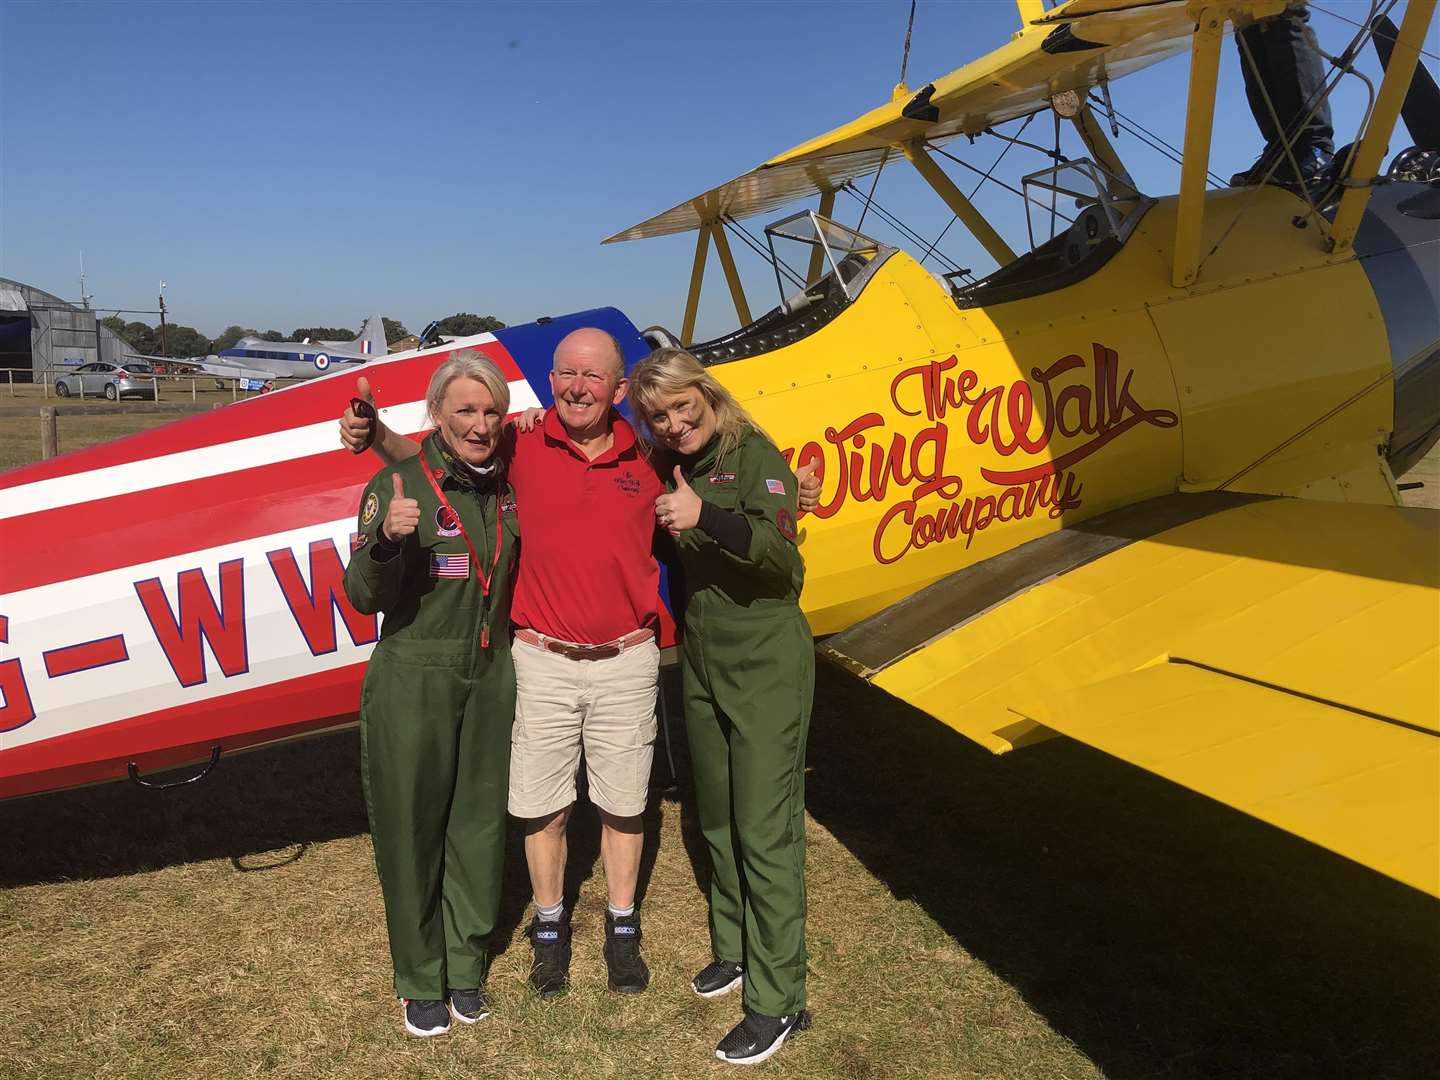 Morag McGilvray and Joan Mackenzie during their charity fundraising wing walk.